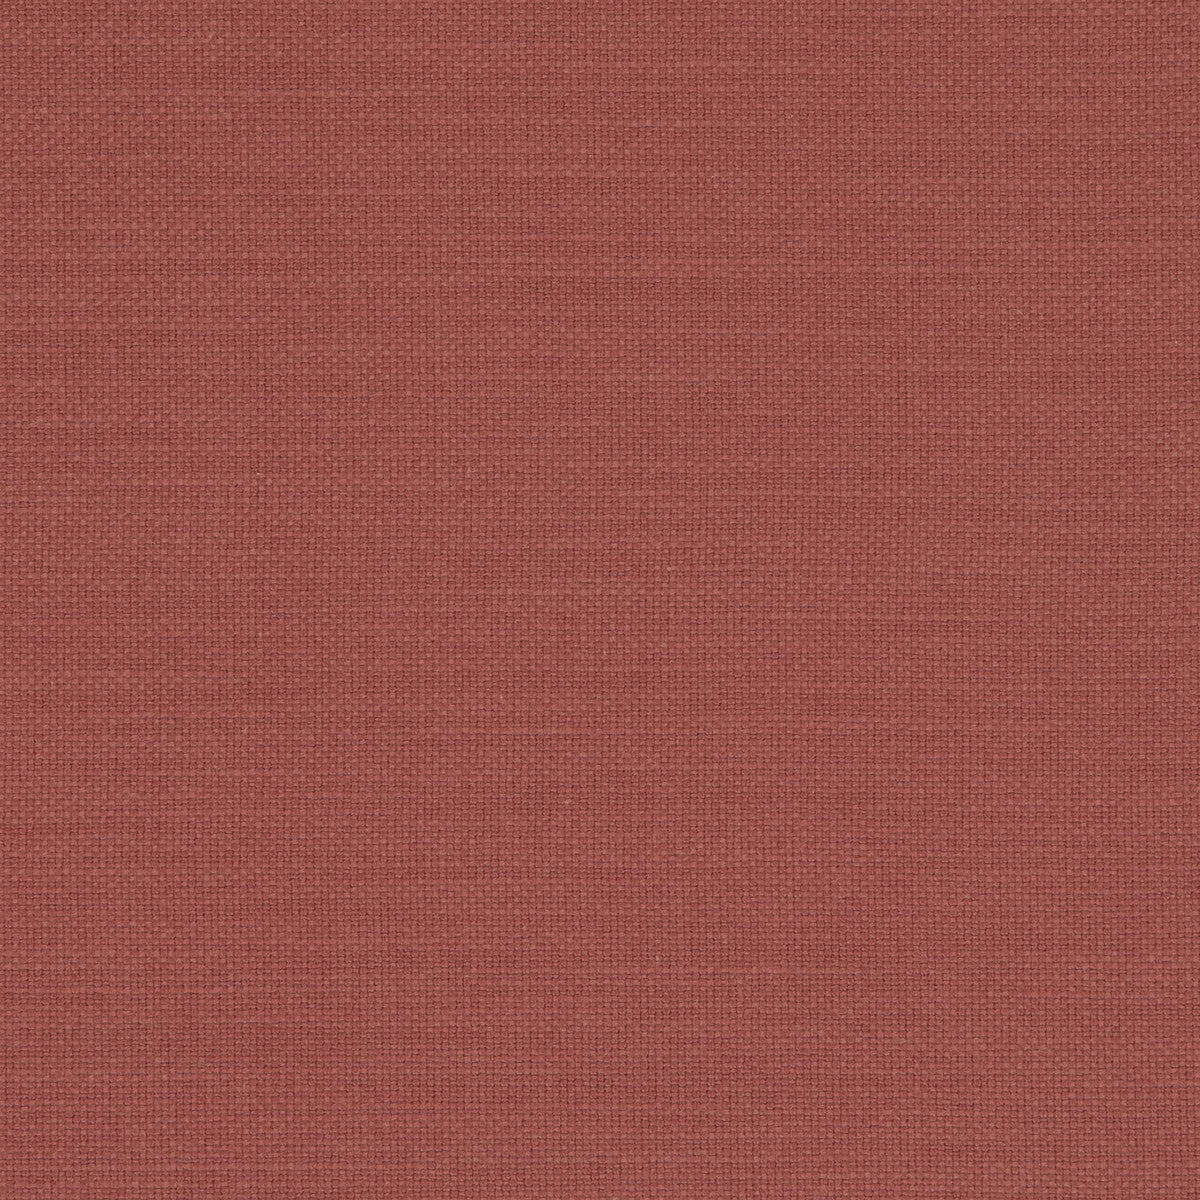 Nantucket fabric in sienna color - pattern F0594/46.CAC.0 - by Clarke And Clarke in the Clarke &amp; Clarke Nantucket collection